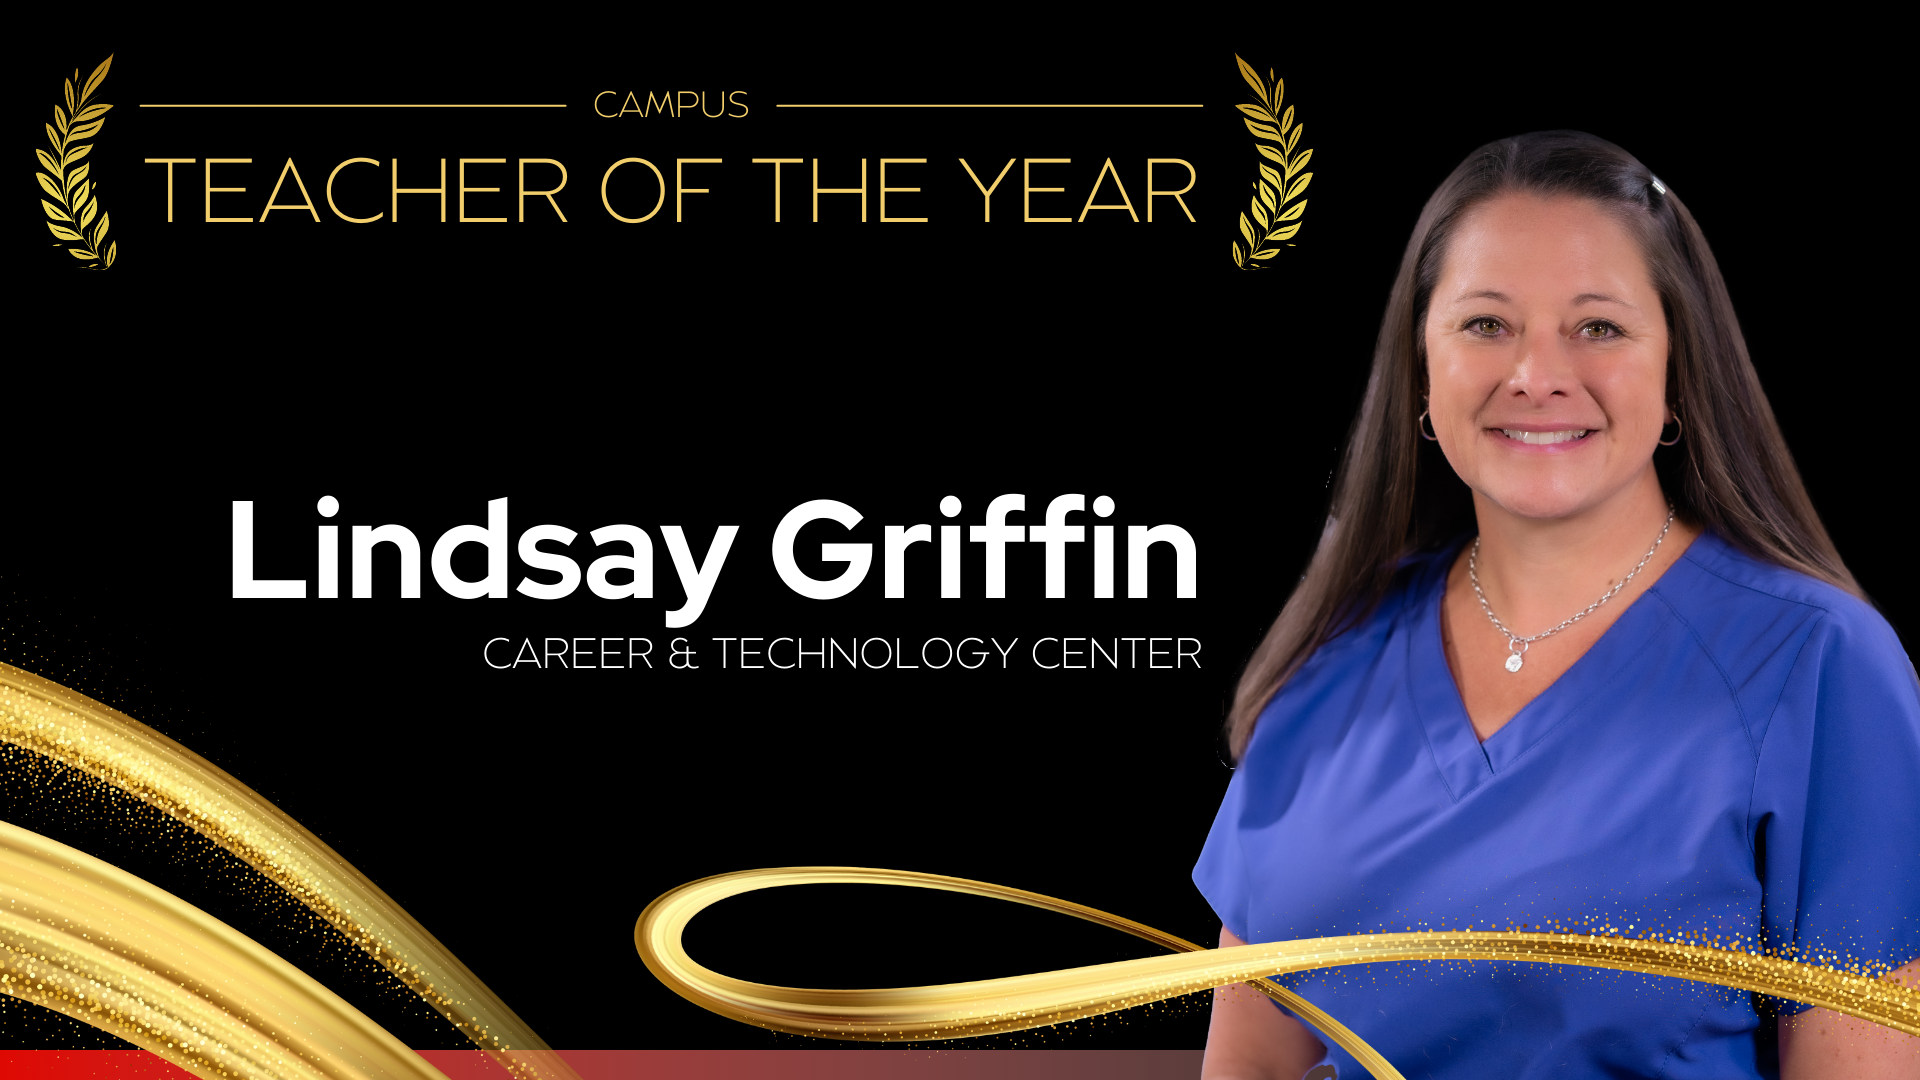 Campus Teacher of the Year Career and Technology Center - Lindsay Griffin 